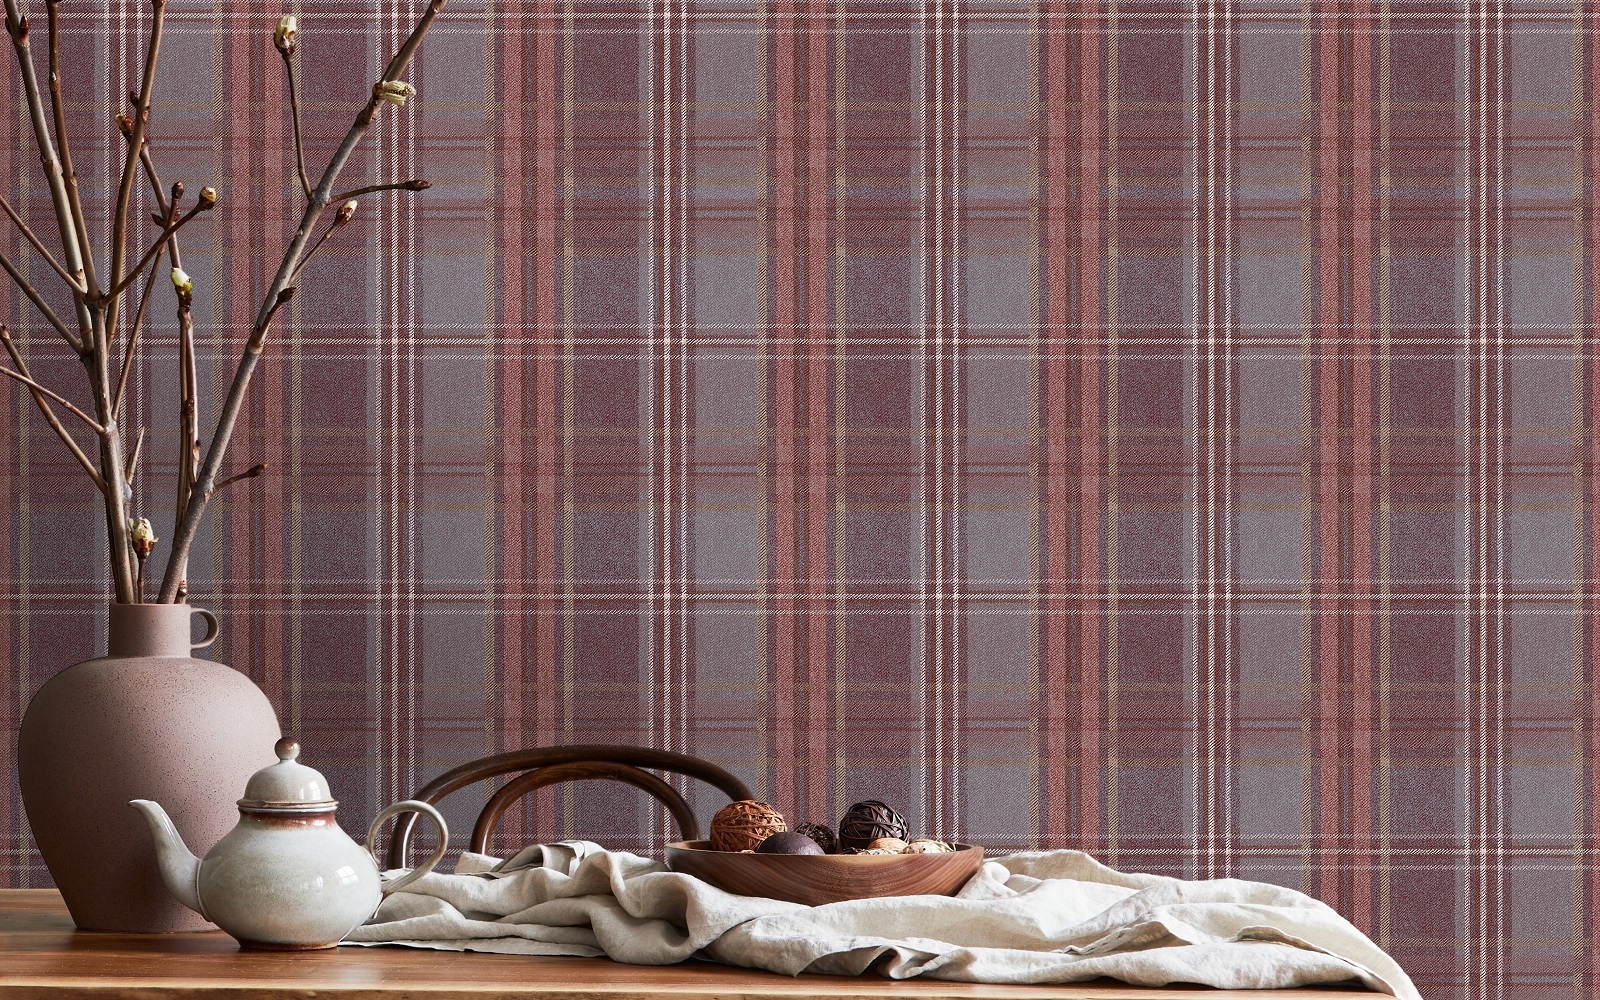 clash of the tartans wallcovering by Newmor